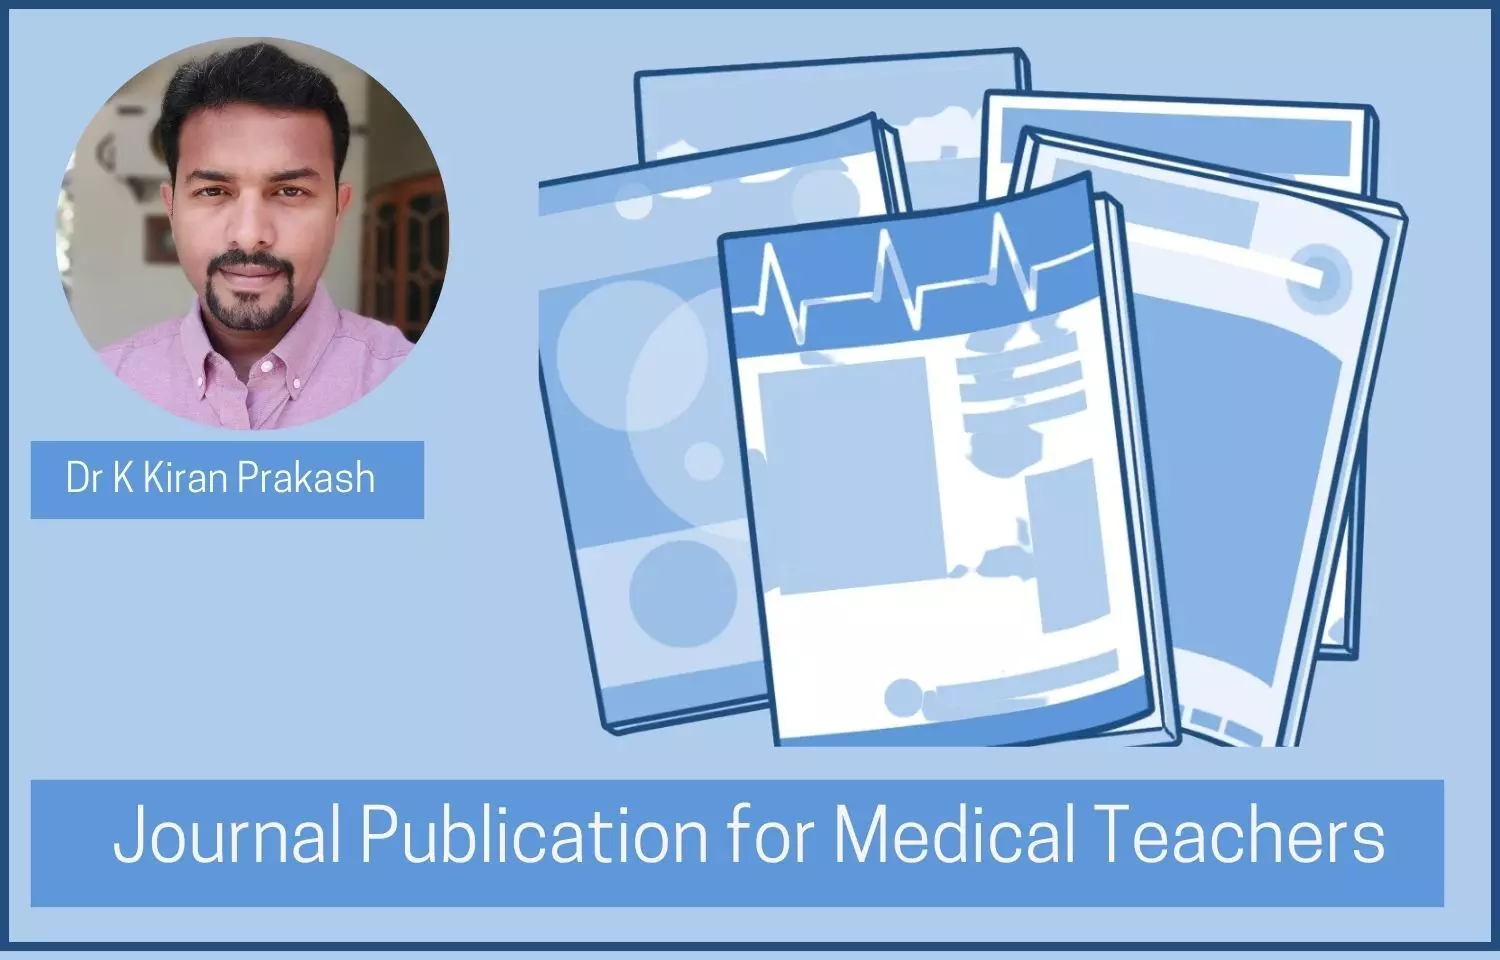 Attention Medical Teachers, Researchers: Here is How To Check Indexing Status of Journal